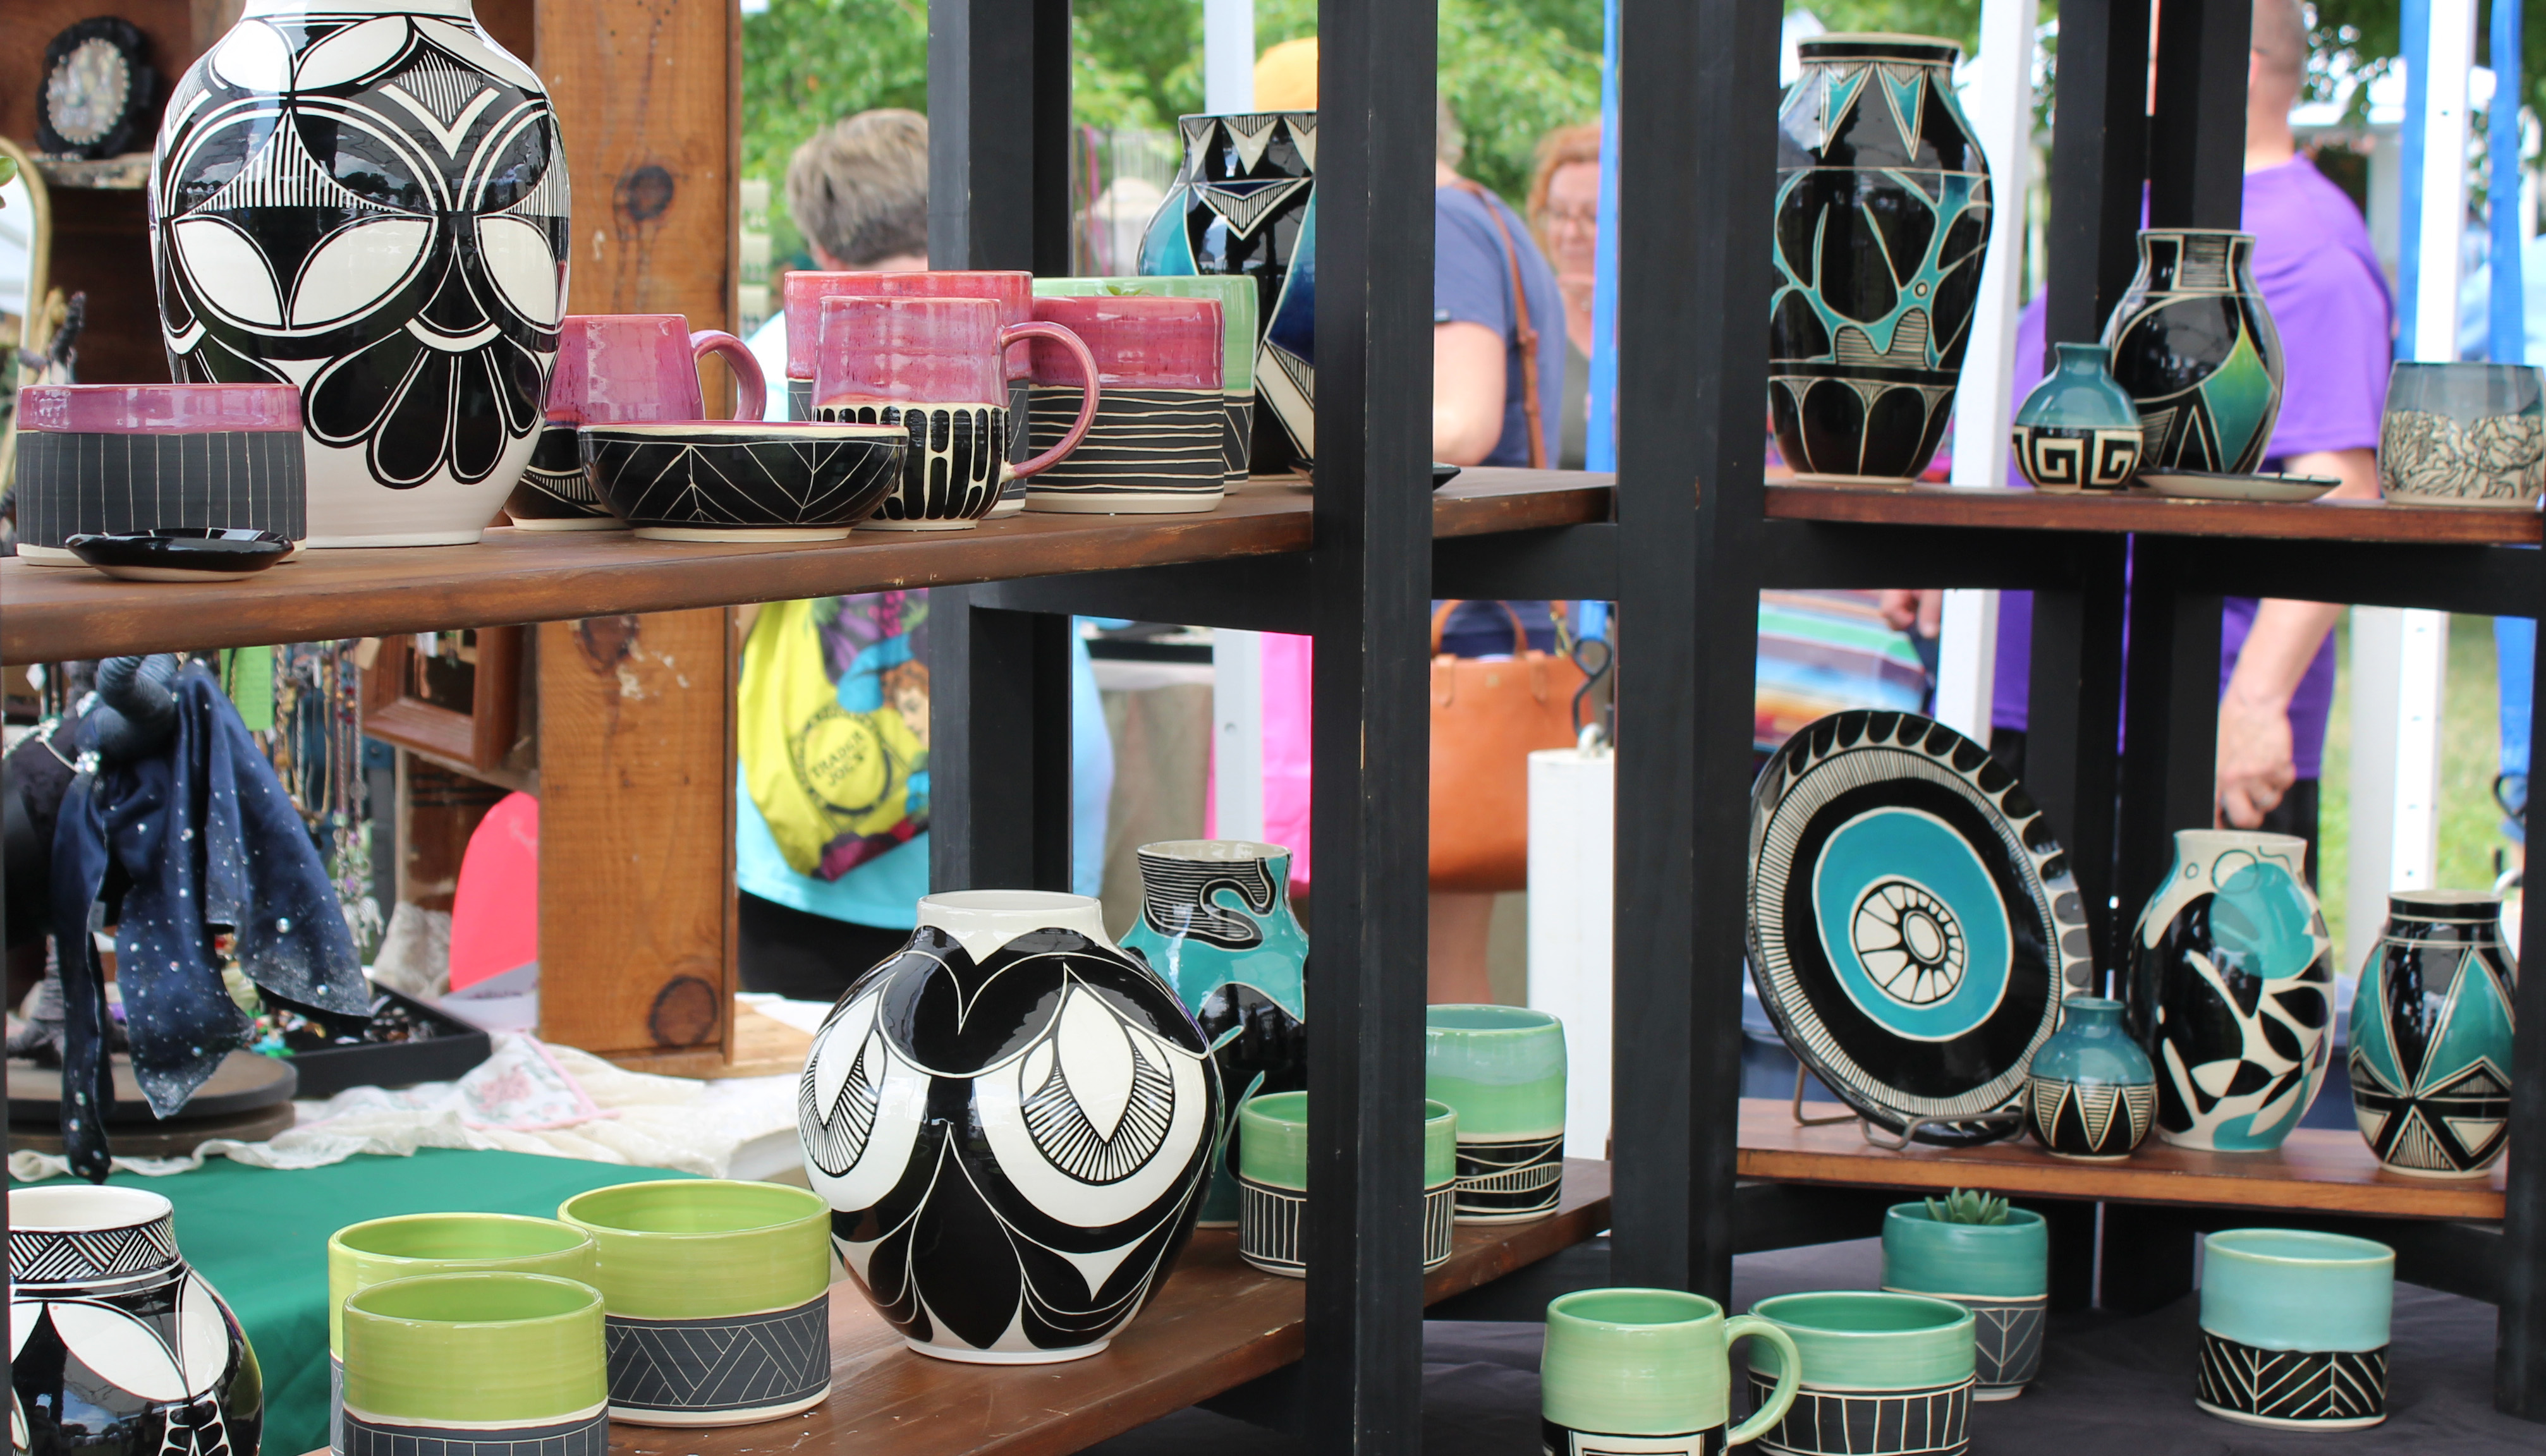 A display of ceramics with rich hued glazes and bold geometric designs.